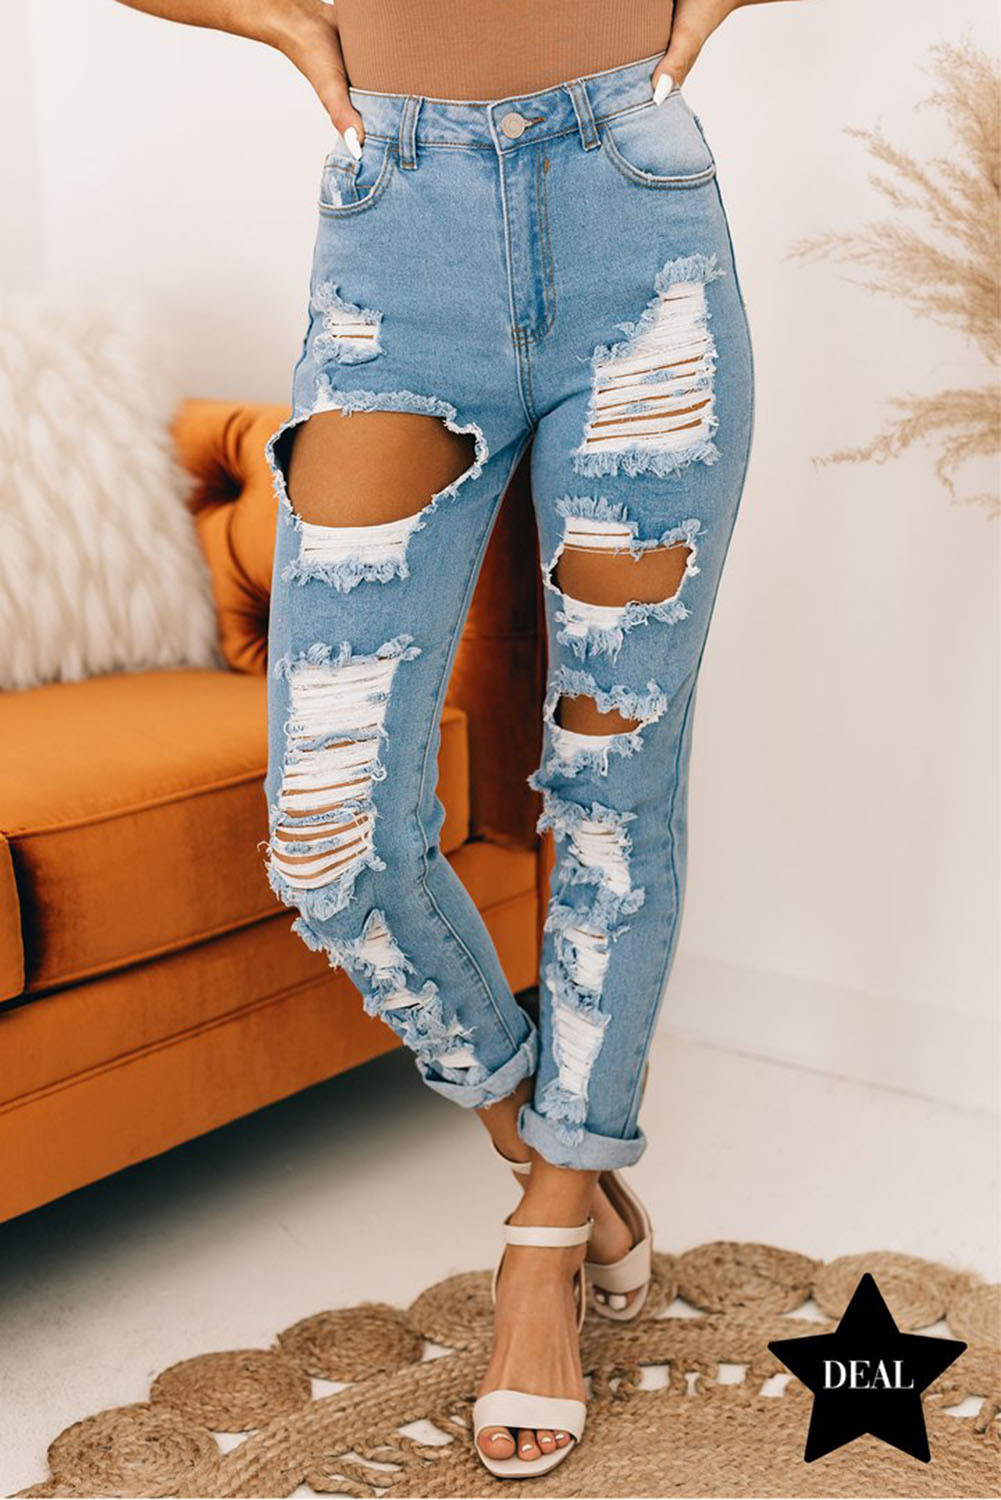 Wholesale Other Category, Cheap Light Blue Distressed Holes Jeans Online